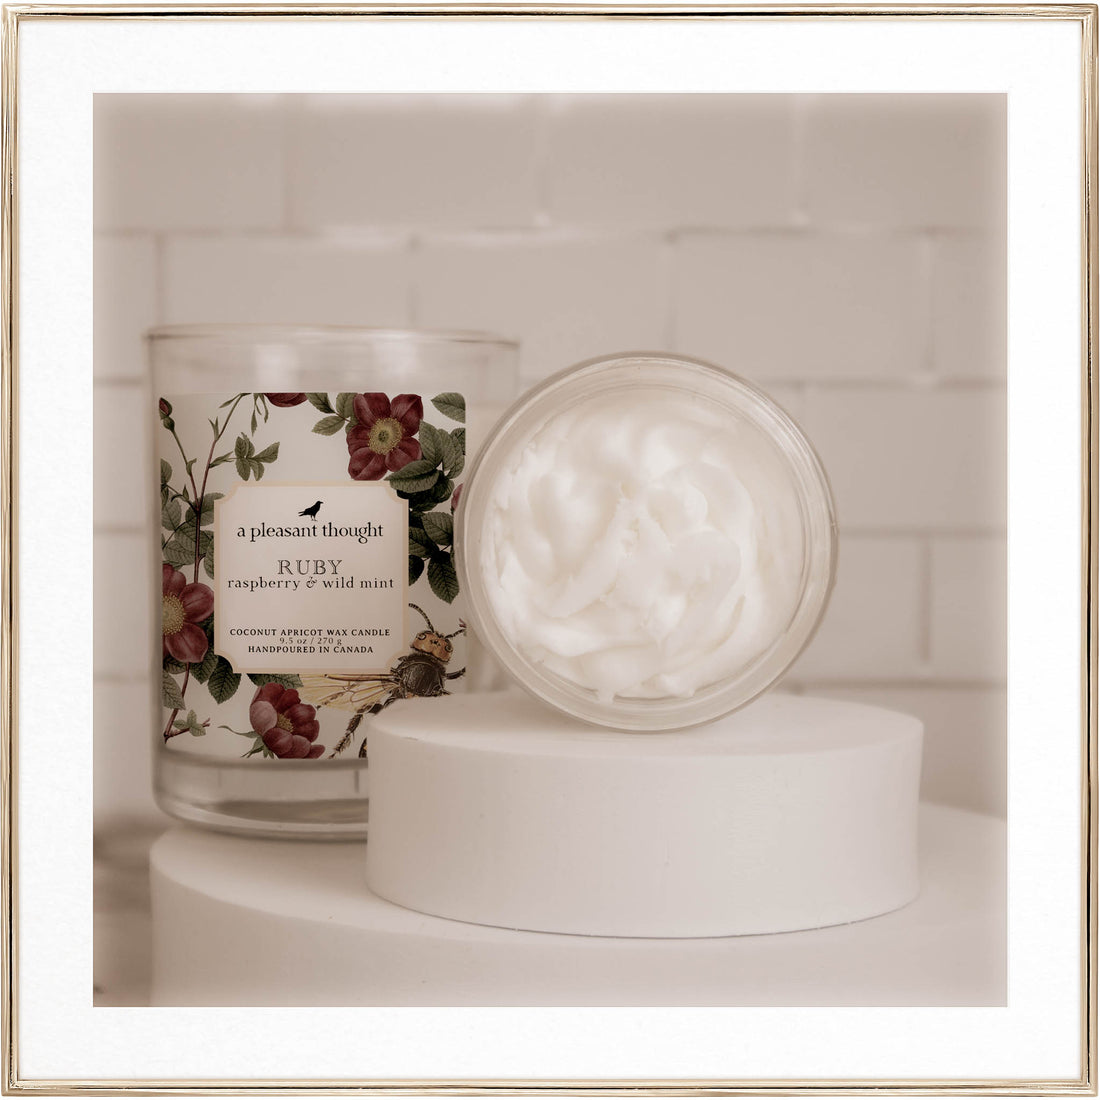  ruby home fragrance a pleasant thought